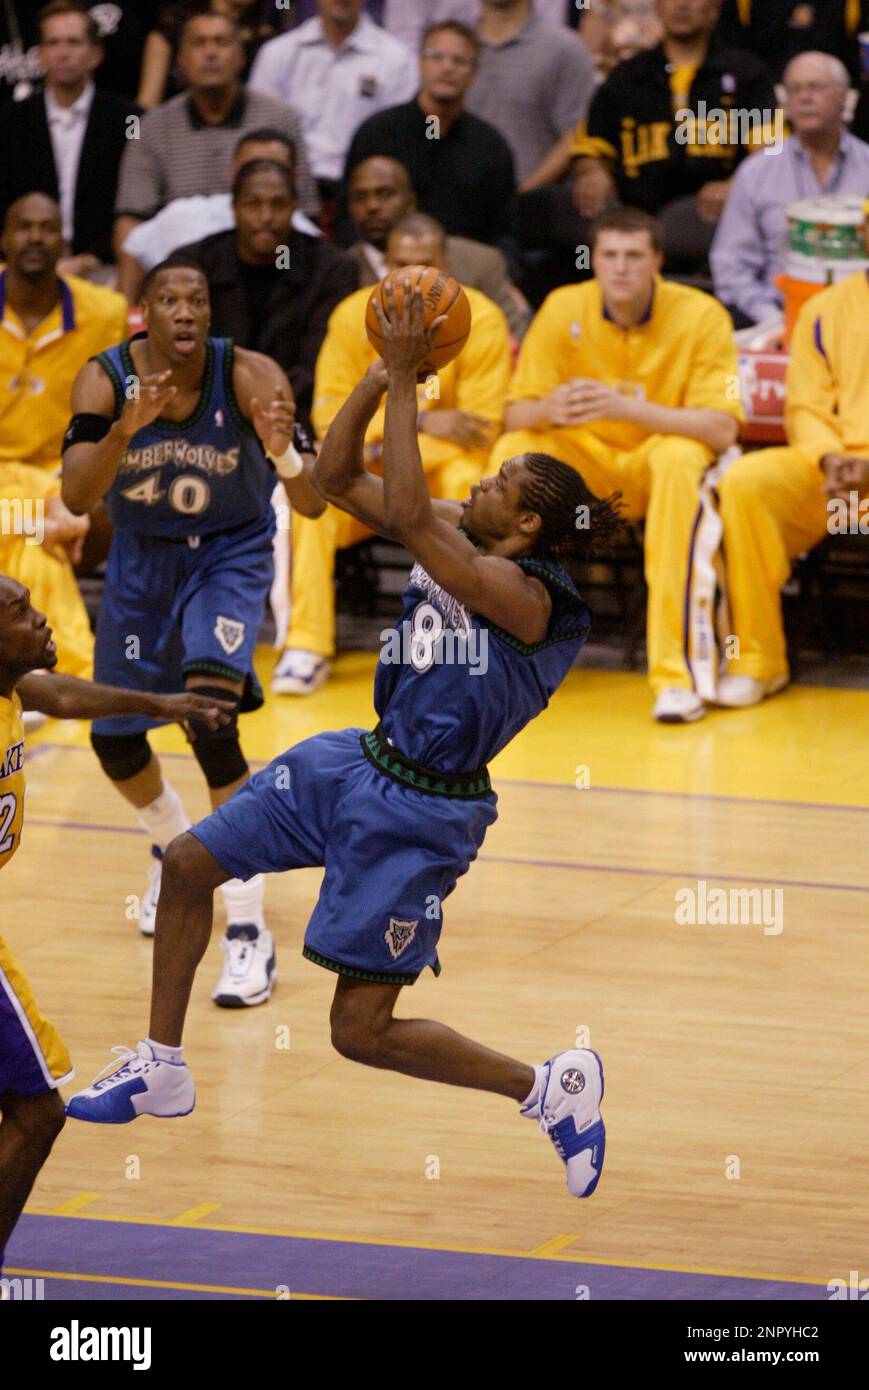 The sneakers worn by Latrell Sprewell of the Golden State Warriors